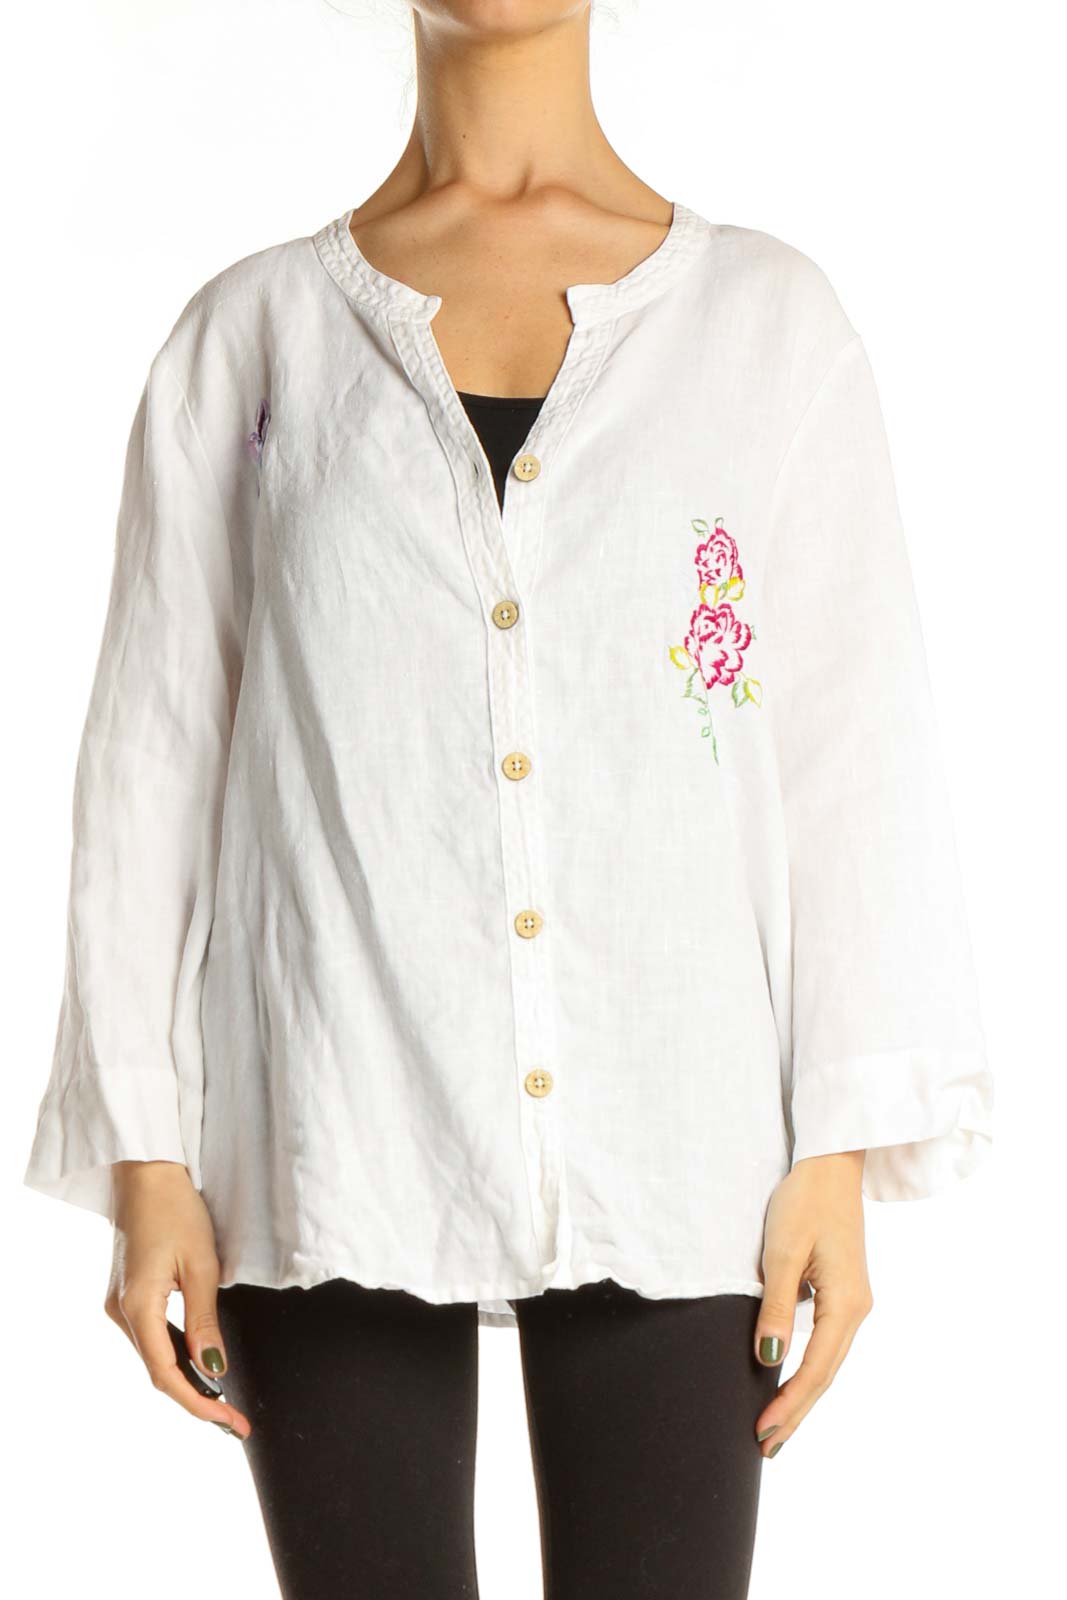 Reworked: White Hand Embroidered Butterfly & Flower Linen Shirt Front